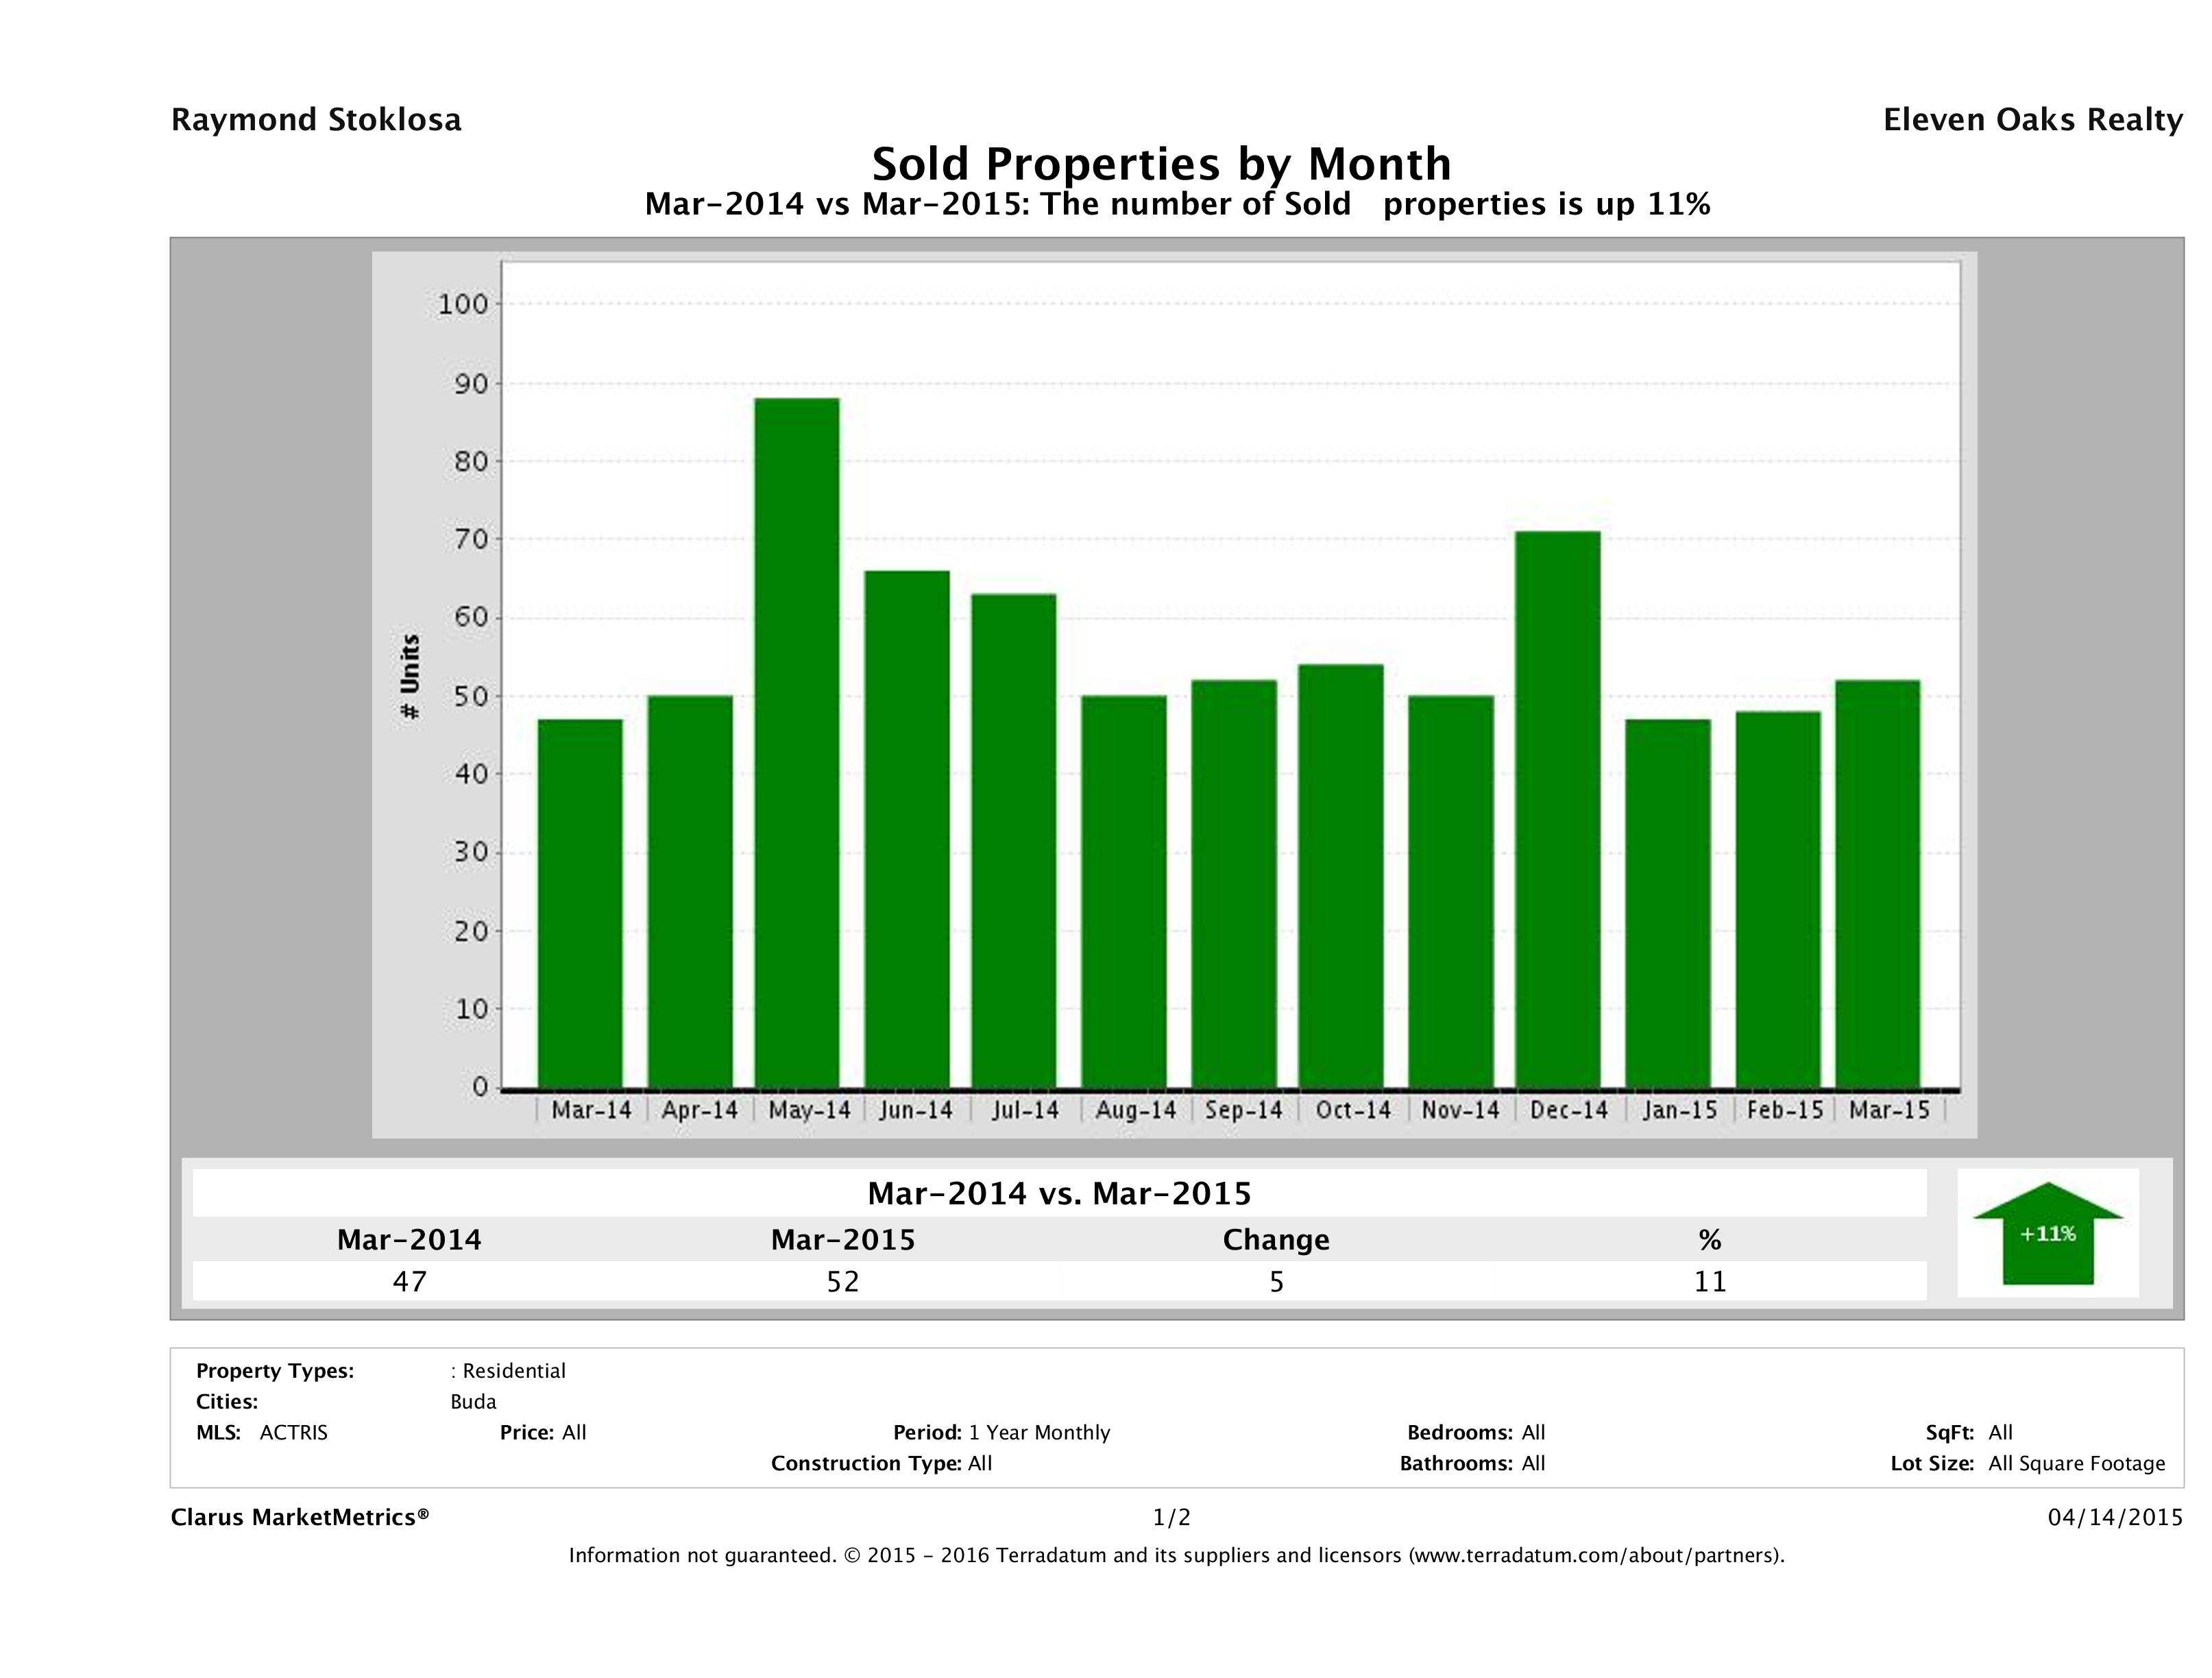 Buda number of homes sold March 2015